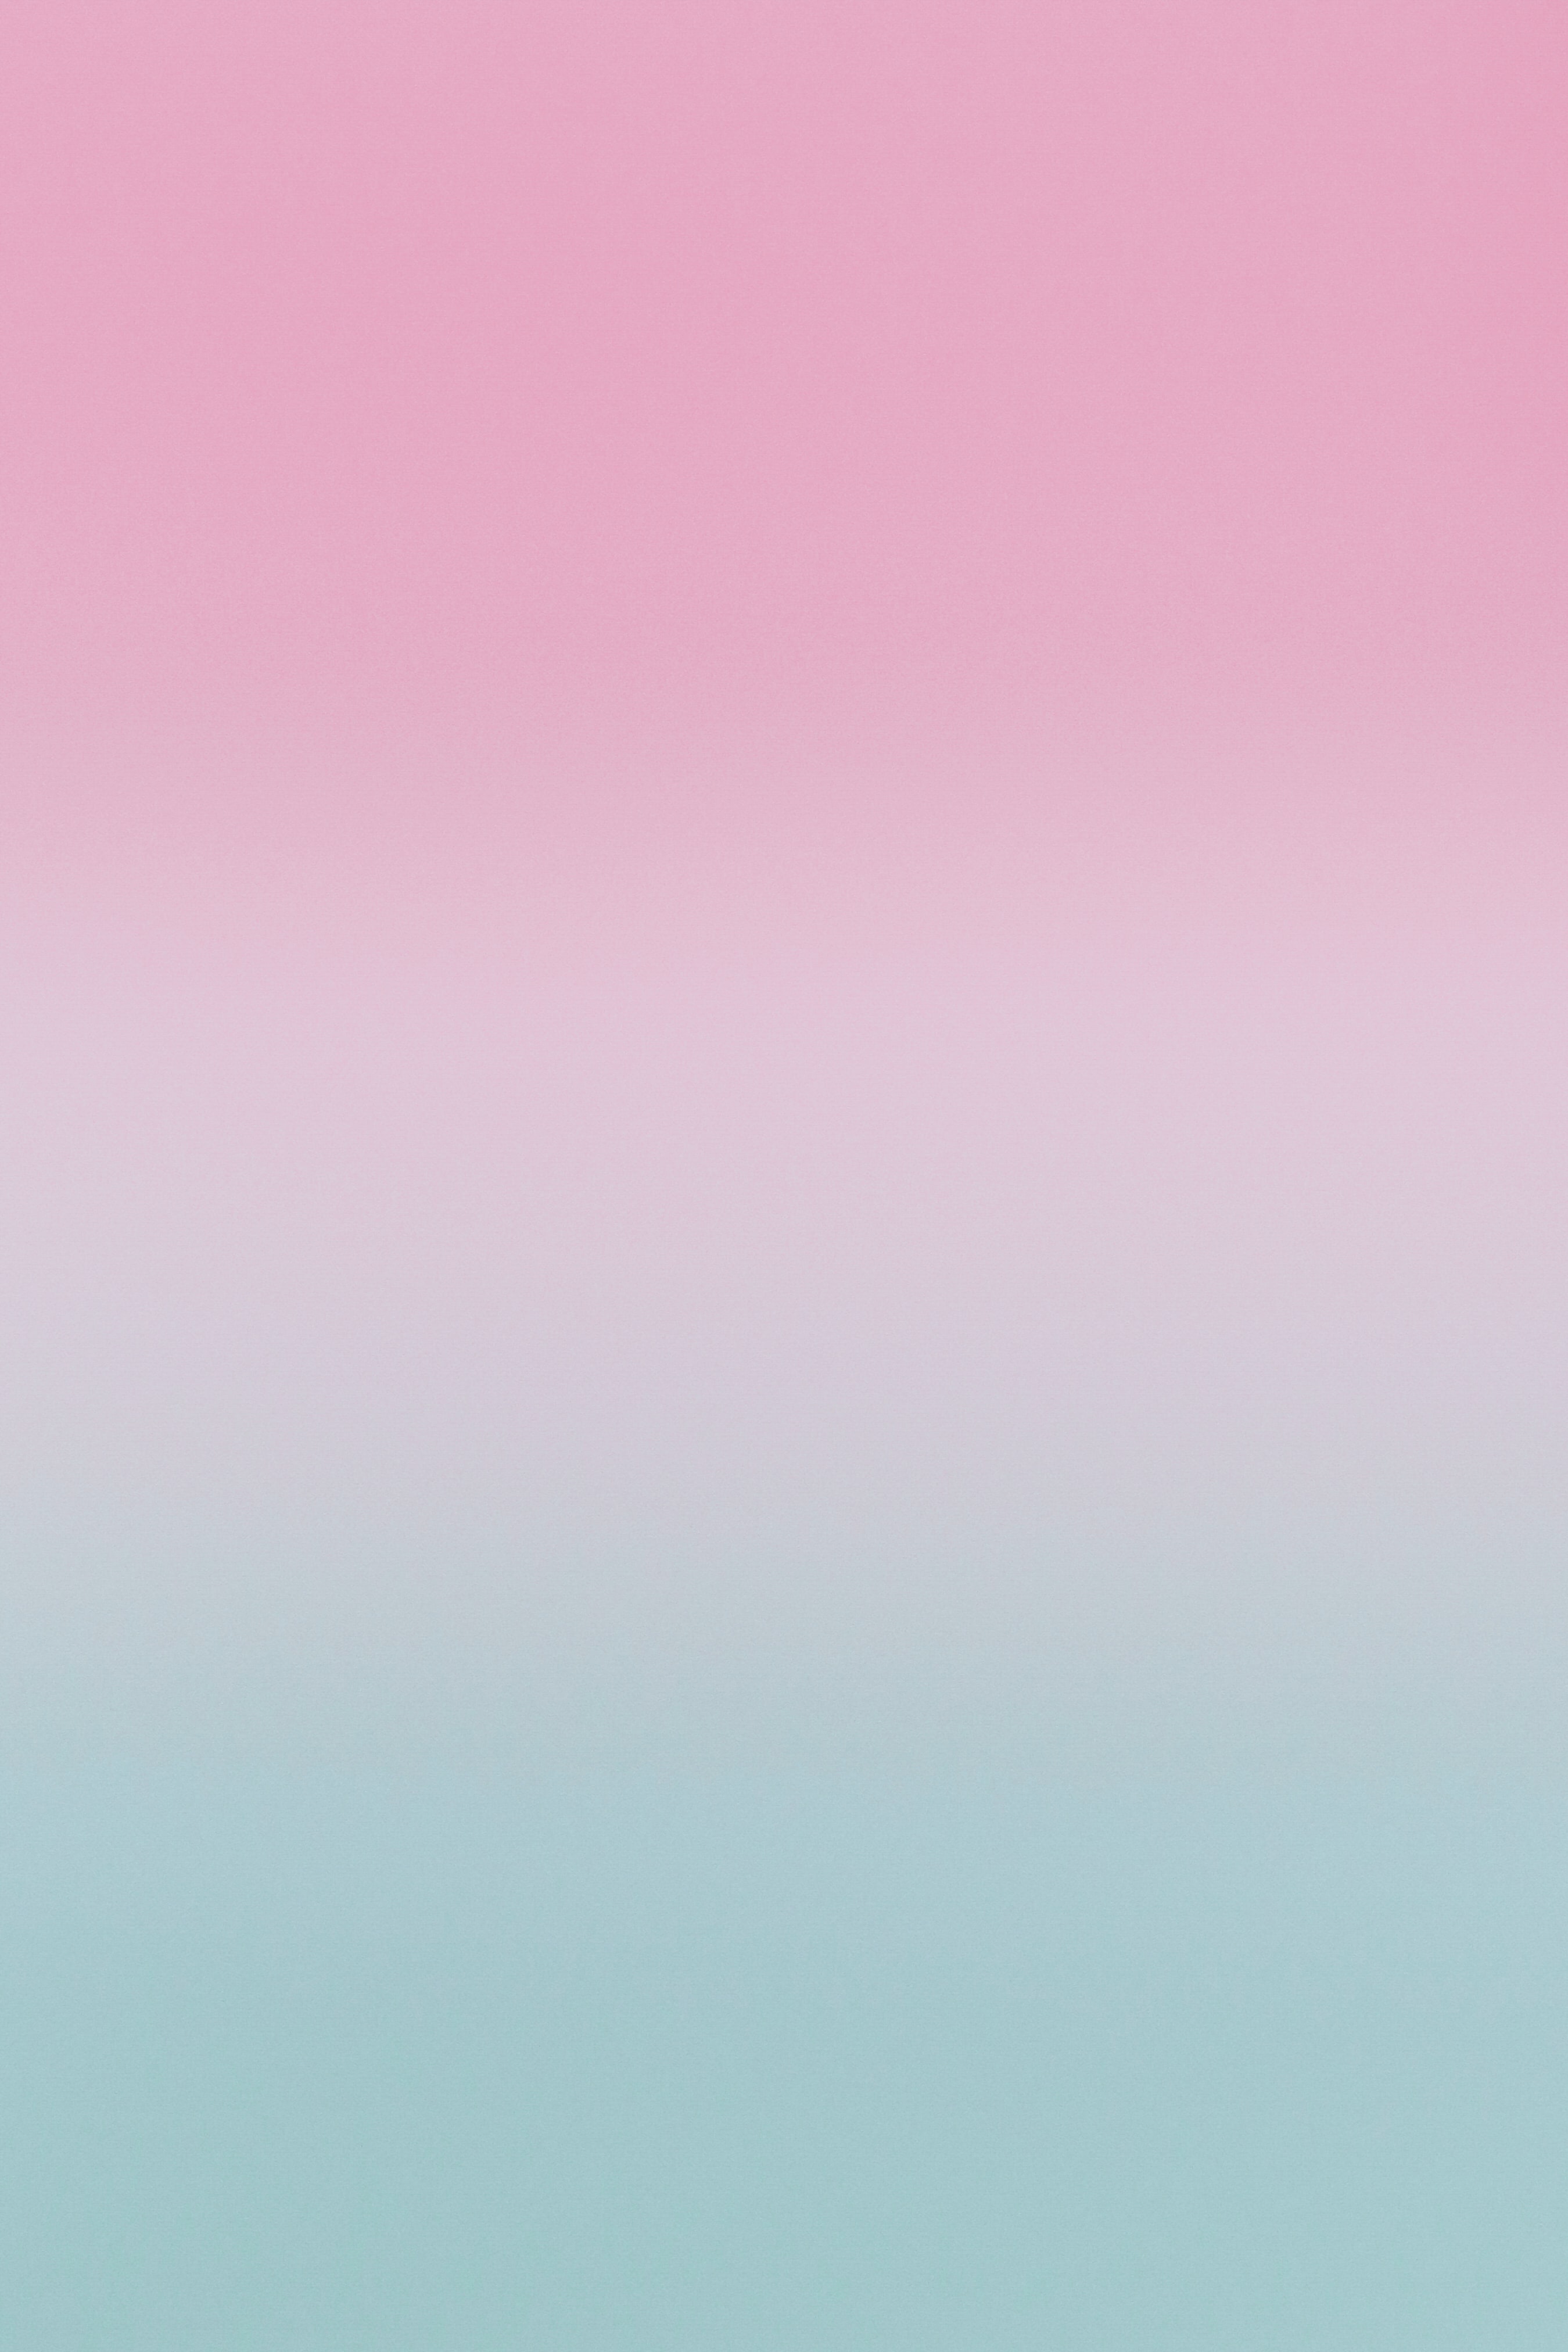 pink, blur, smooth, gradient, blue, abstract